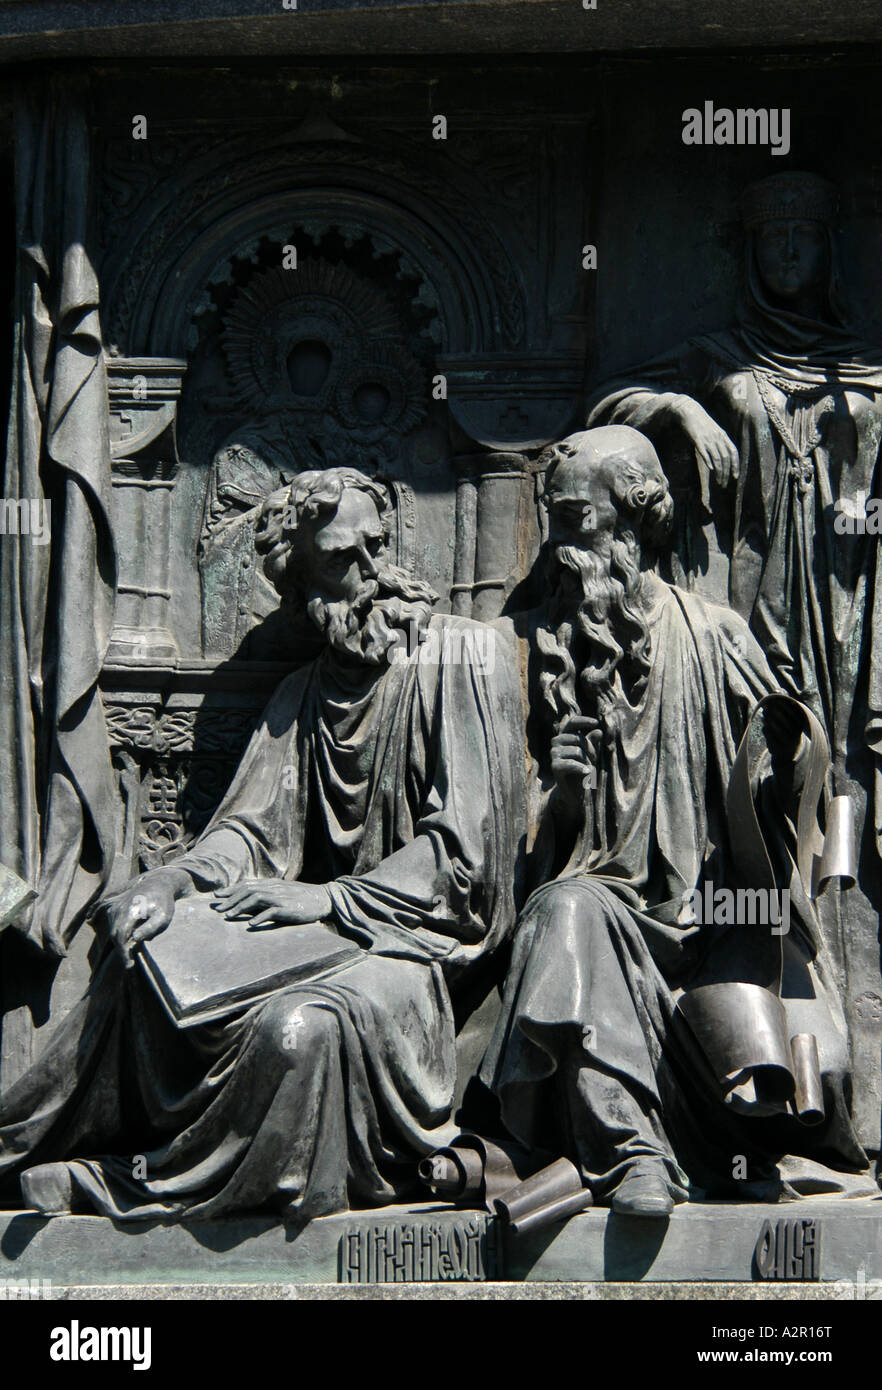 St Cyril and Methodius. Detail of the Monument to the Millennium of Russia in Veliky Novgorod, Russia Stock Photo